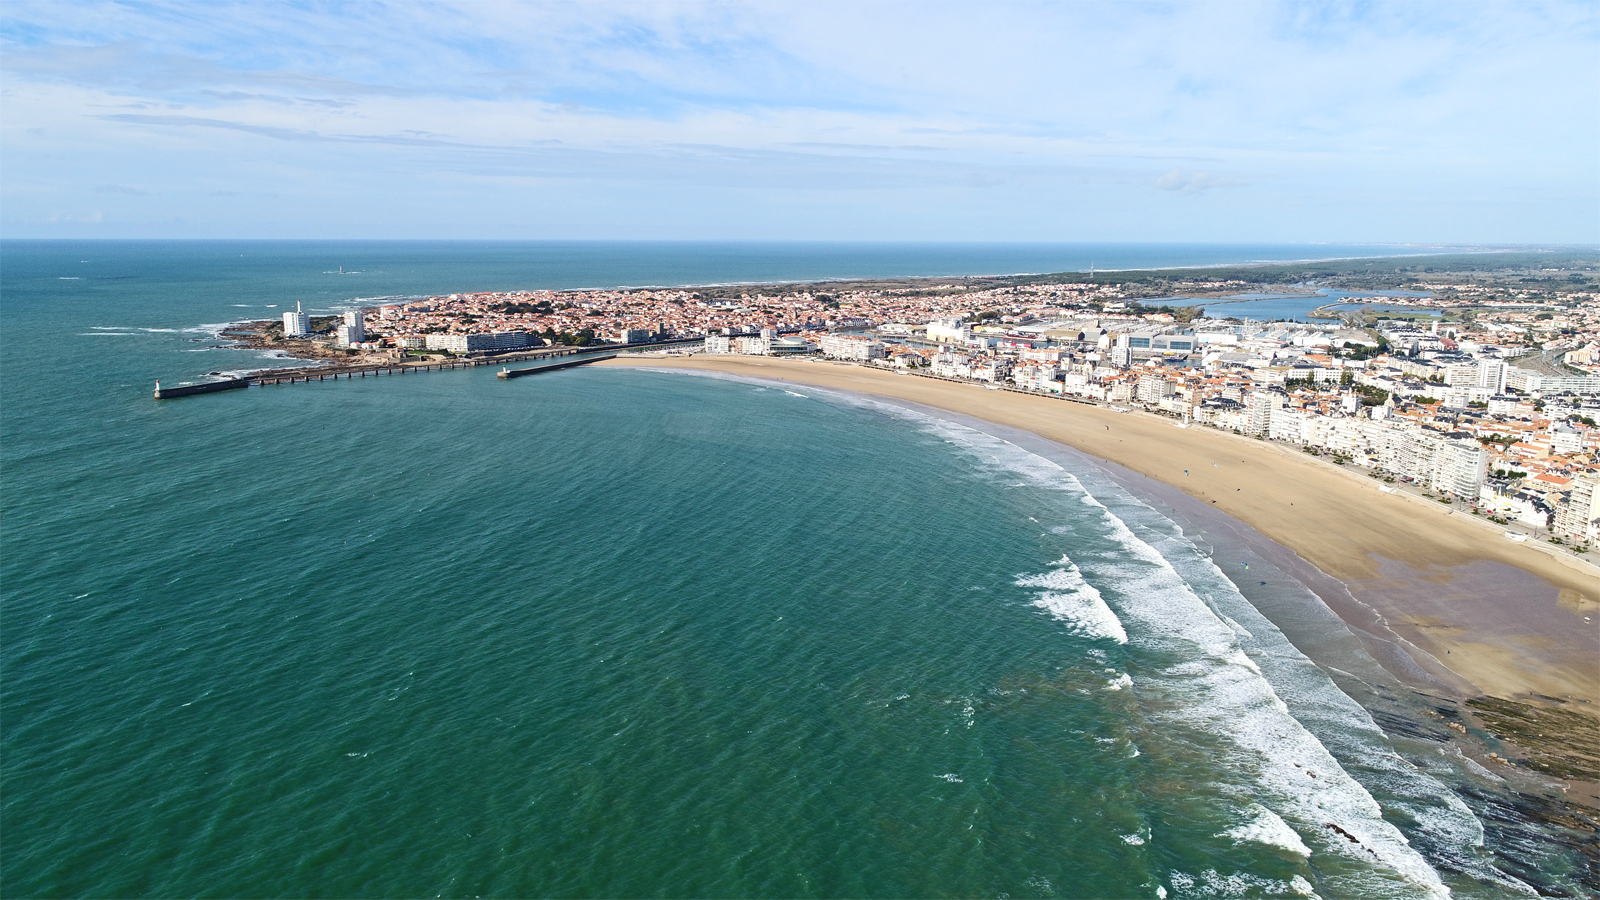 Top 10 things to do in Les Sables d'Olonne